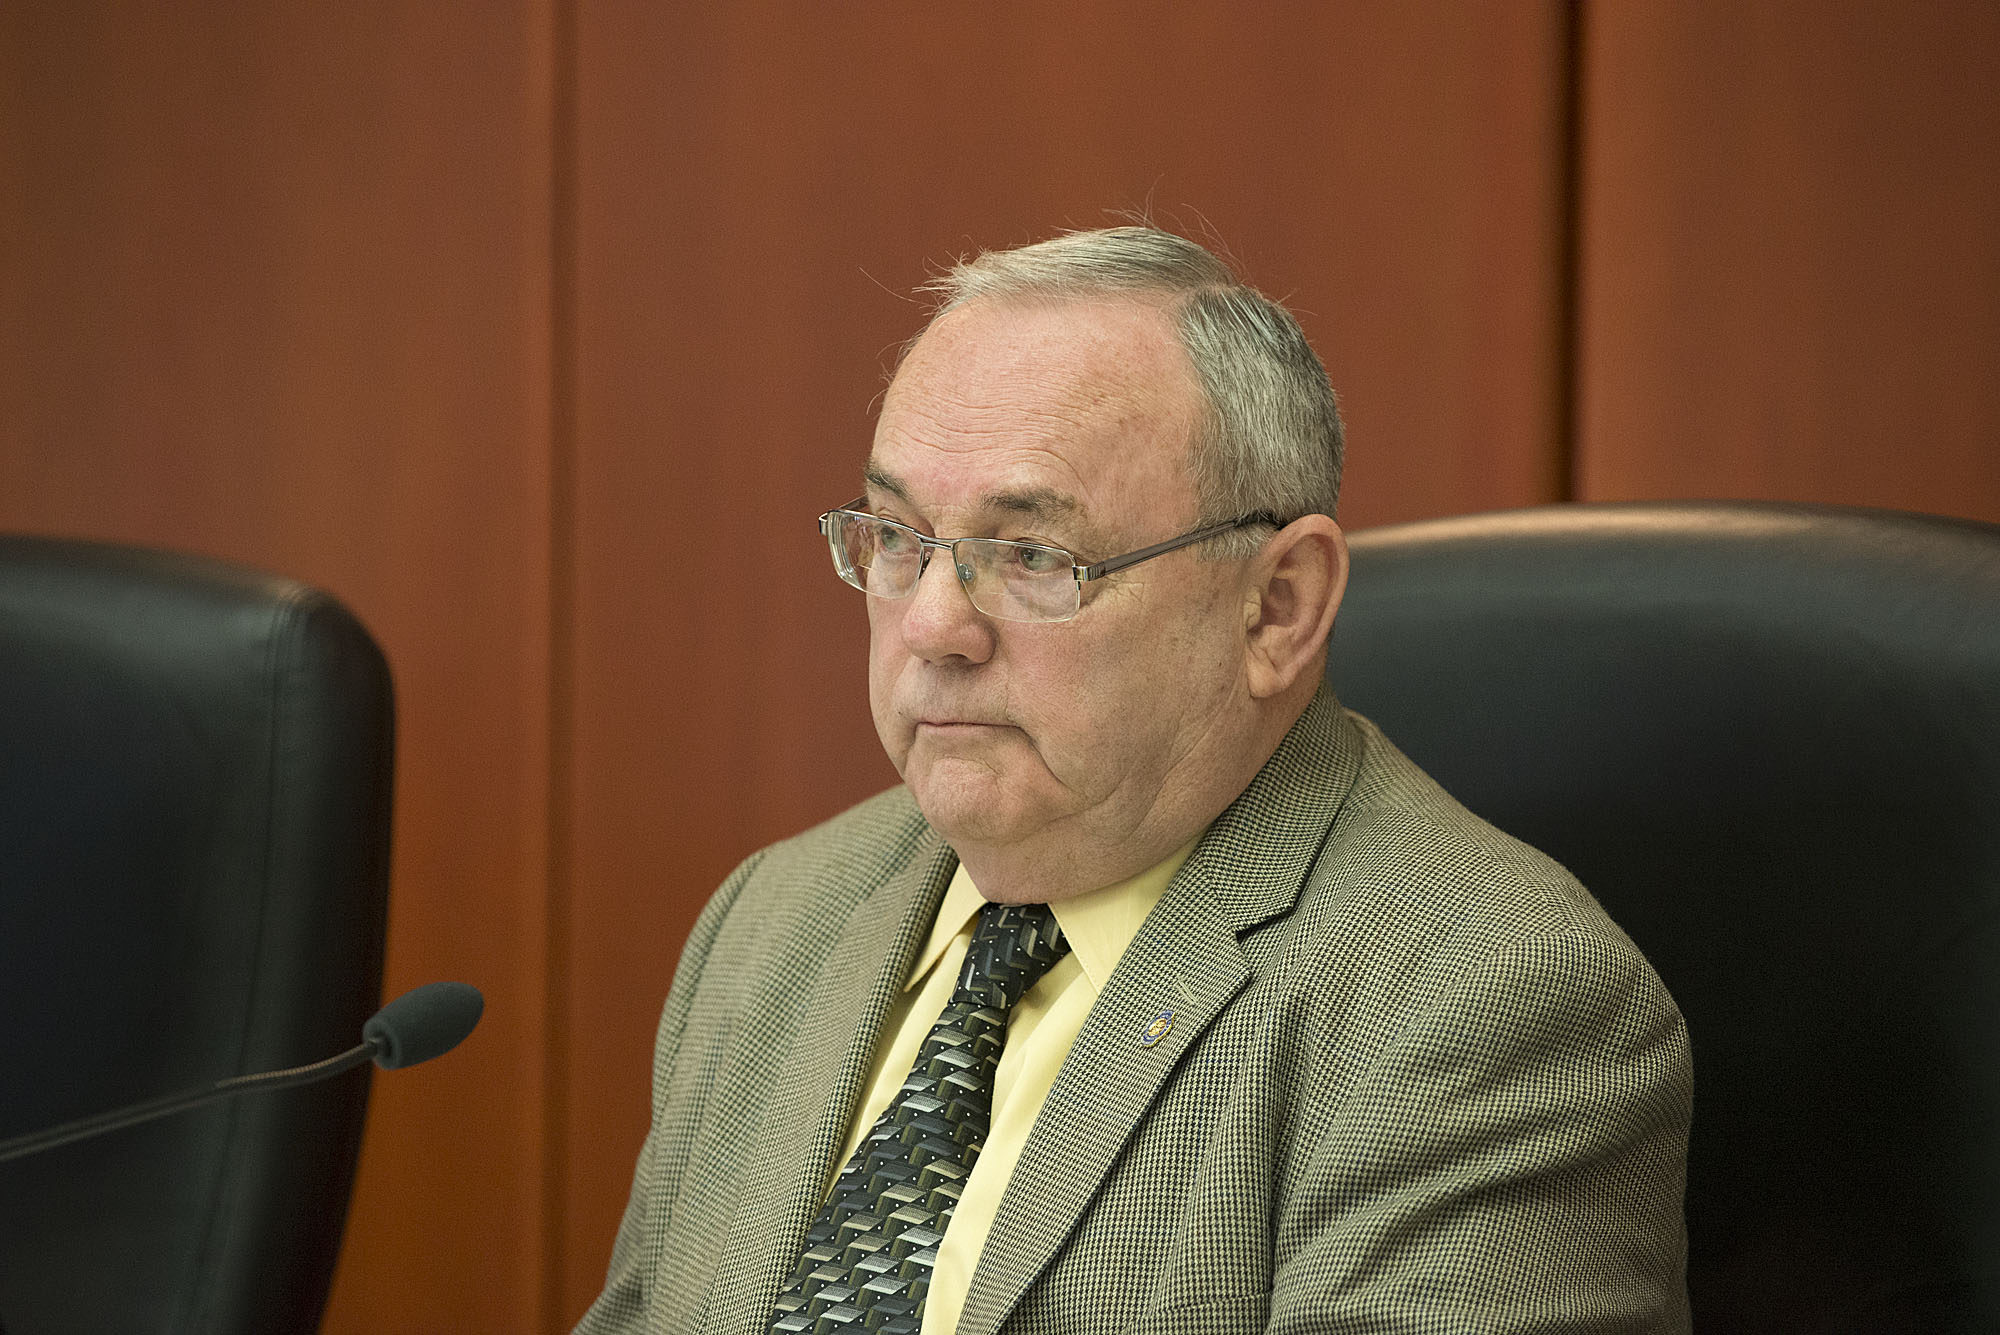 Clark County Council member Tom Mielke is appealed the dismissal of a recall petition for councilmembers Jeanne Stewart and Julie Olson and council Chair Marc Boldt.